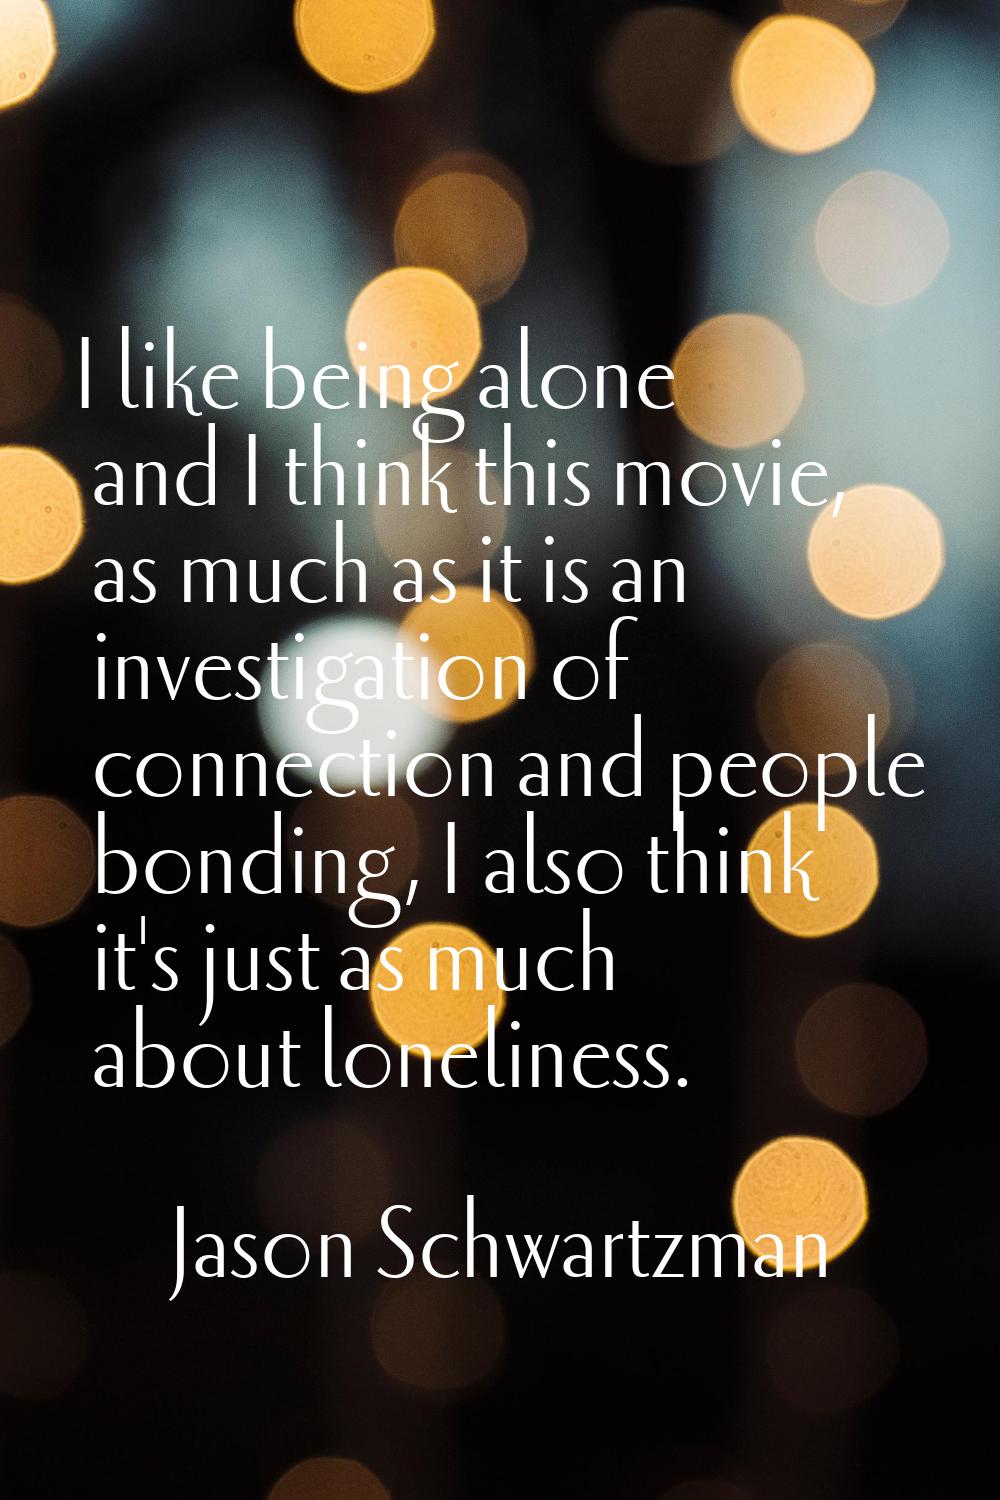 I like being alone and I think this movie, as much as it is an investigation of connection and peop